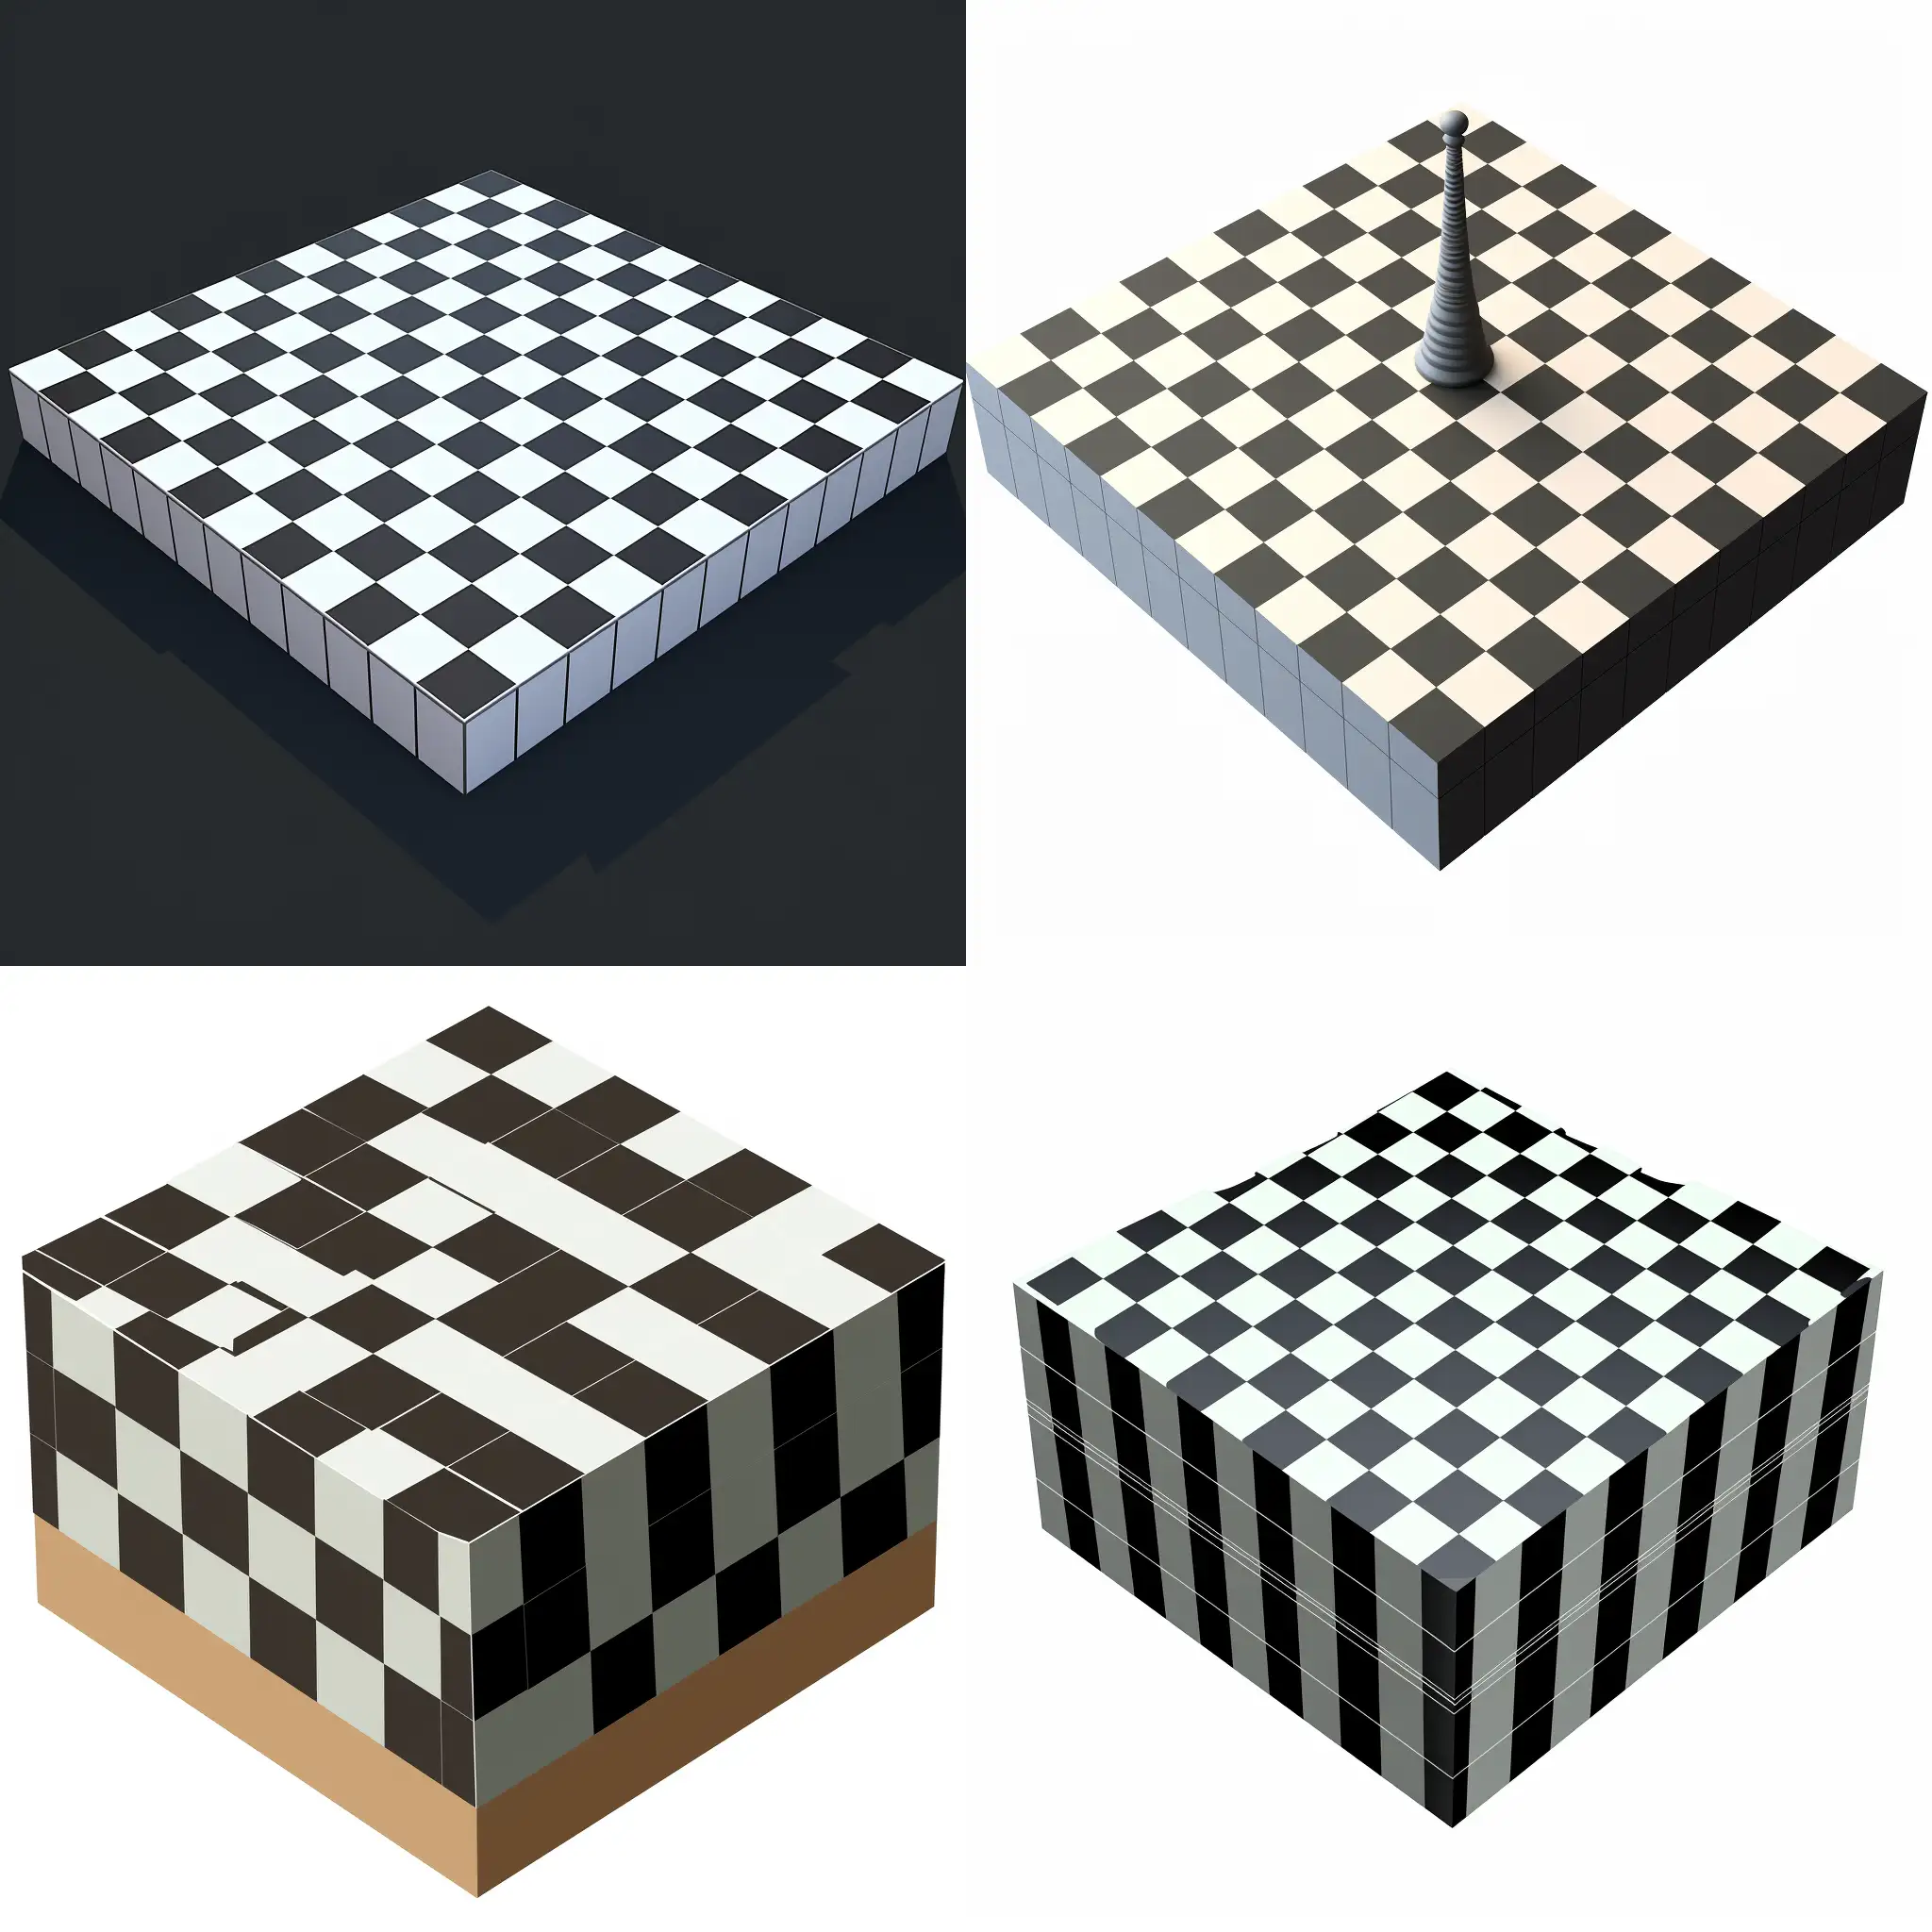 A 3D chessboard with an 8x8 grid, totaling 64 squares. The perspective should clearly show eight rows and eight columns, ensuring an accurate representation of a standard chessboard. The squares should alternate in black and white colors, with distinct boundaries between them. The focus should be on the geometric precision and symmetry of the board, with a clear, top-down view to avoid perspective distortion. The board should have a polished, realistic appearance, emphasizing the texture and material of the squares.